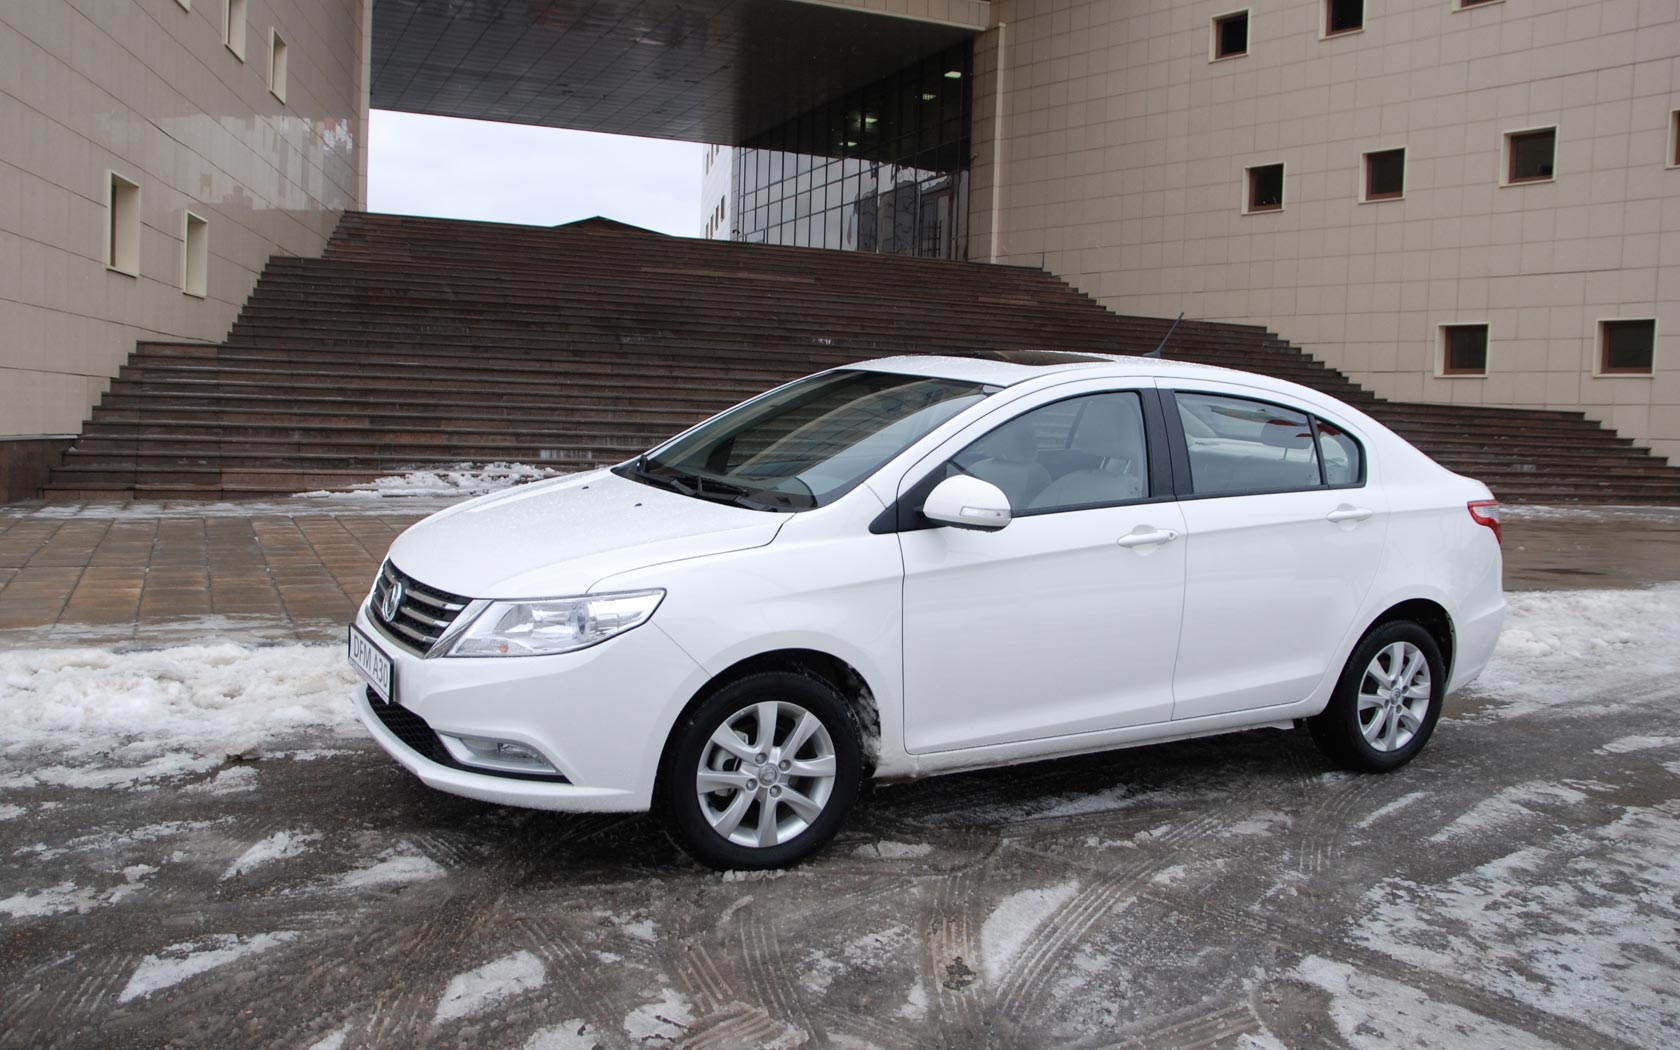  DongFeng A30 